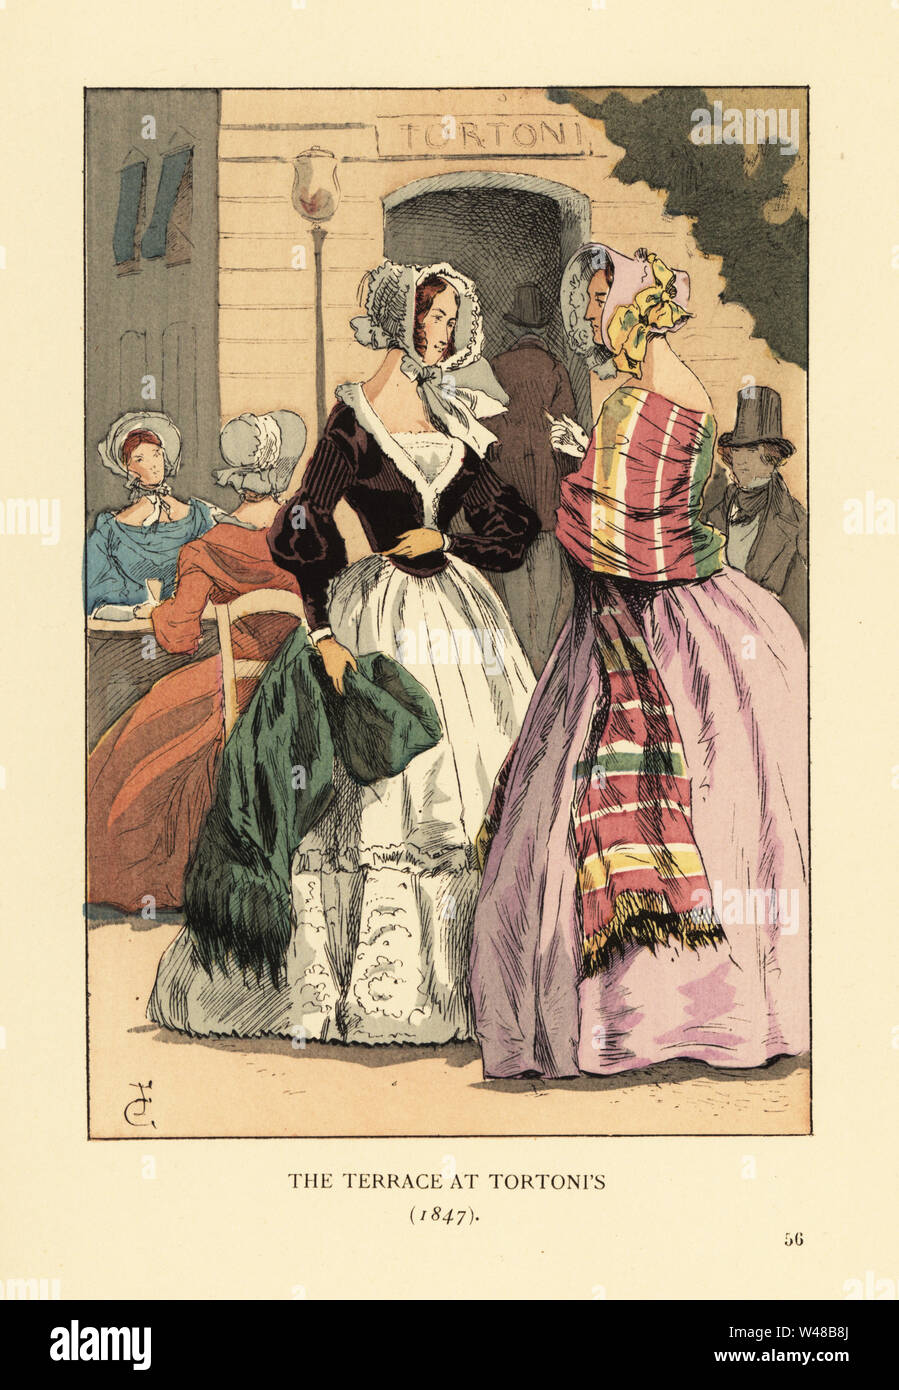 The terrace at Tortoni’s, 1847. Fashionable women in crinolines, large cashmere shawls and bonnets. The Cafe Tortoni Italan icecream parlor, 22 Bouleverd des Italiens, was popular with dandies, intellectuals and ladies of the demi-monde. Handcoloured lithograph by R.V. after an illustration by Francois Courboin from Octave Uzanne’s Fashion in Paris, William Heinemann, London, 1898. Stock Photo